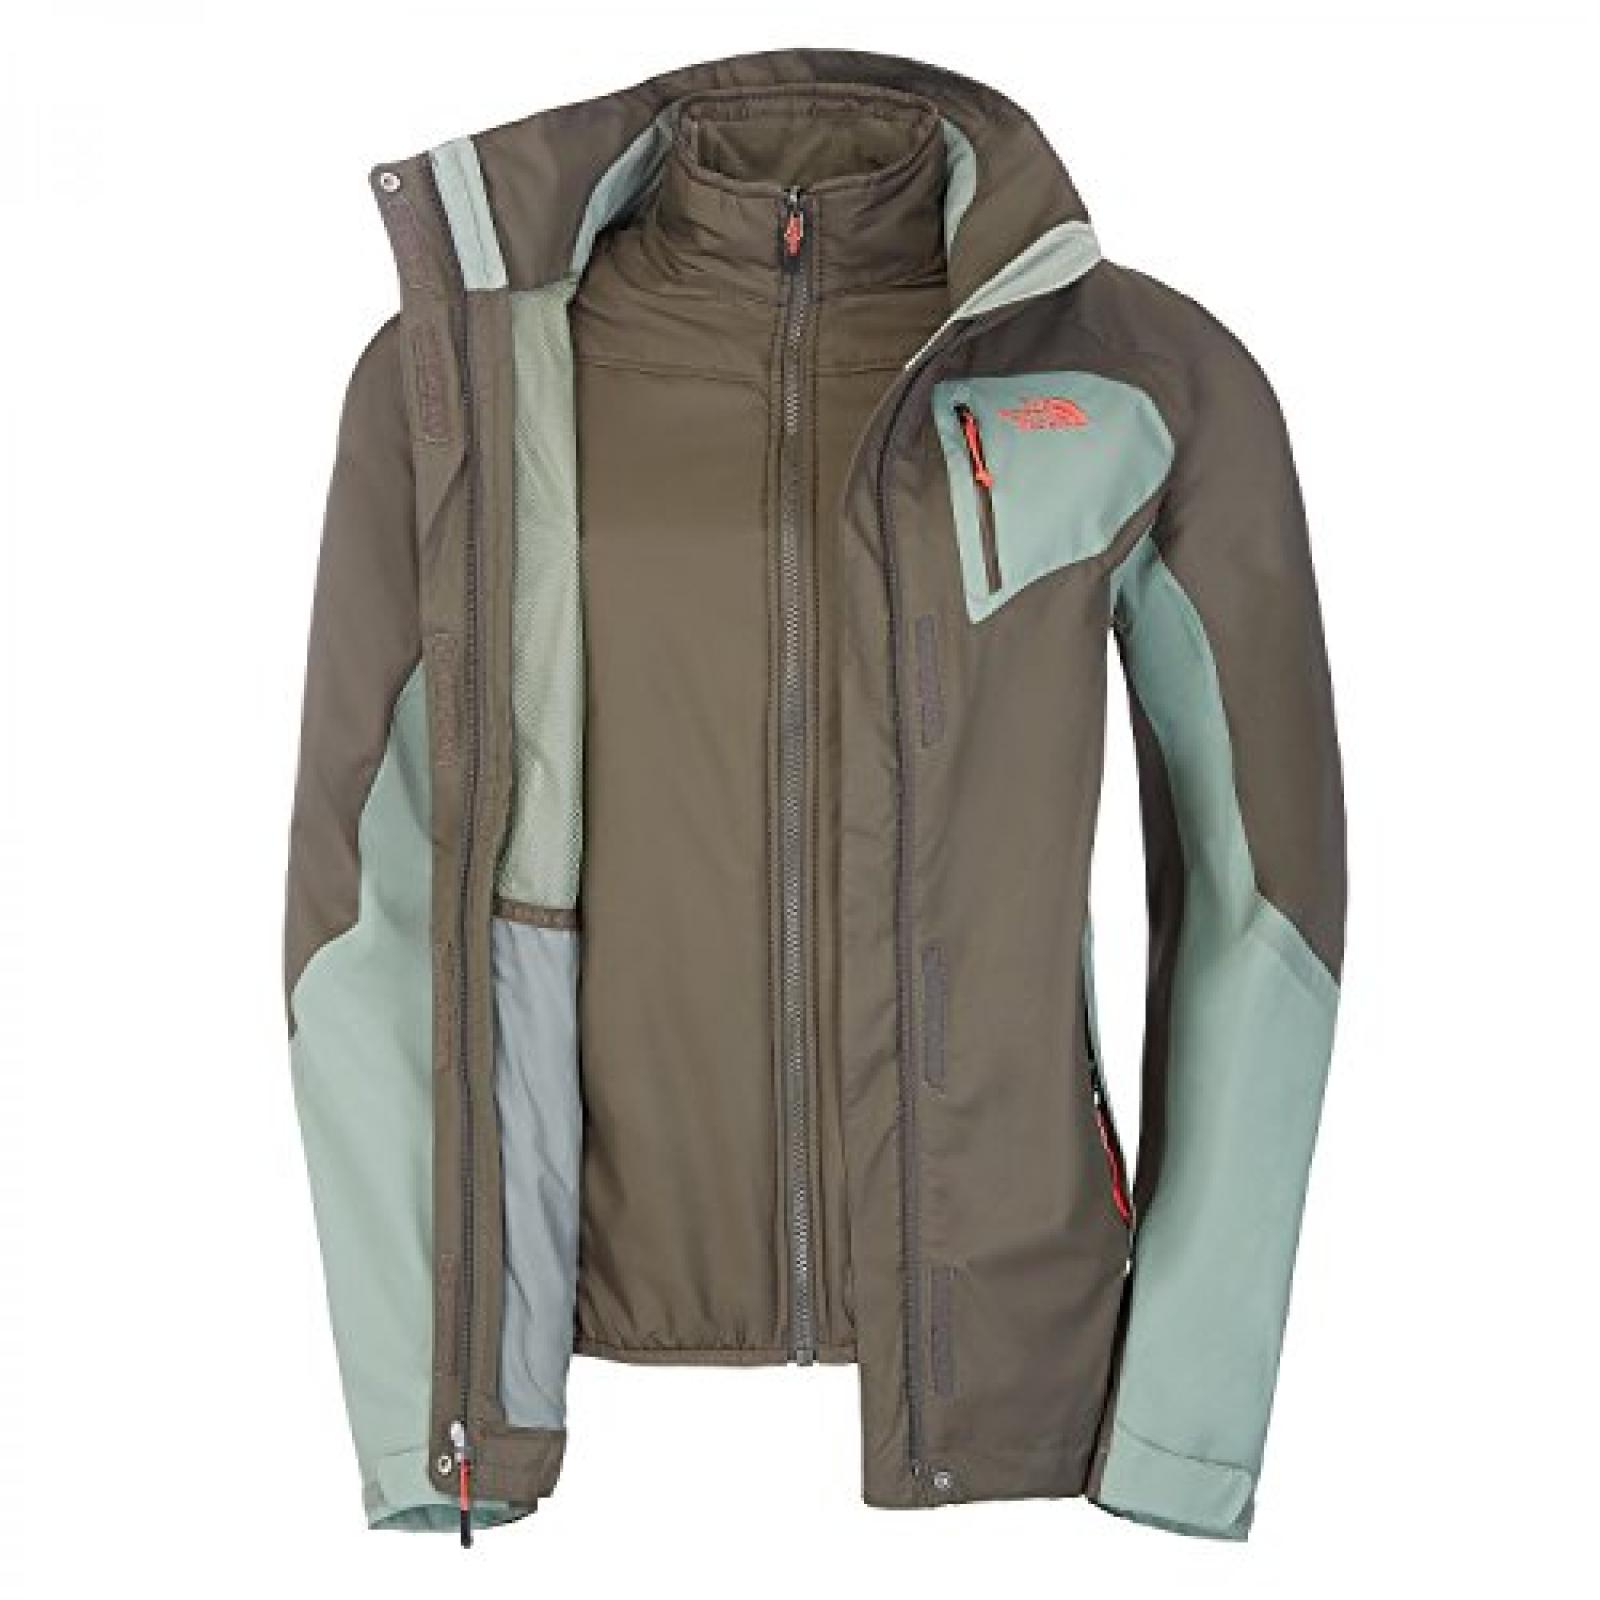 THE NORTH FACE Damen Jacke Zenith Triclimate 